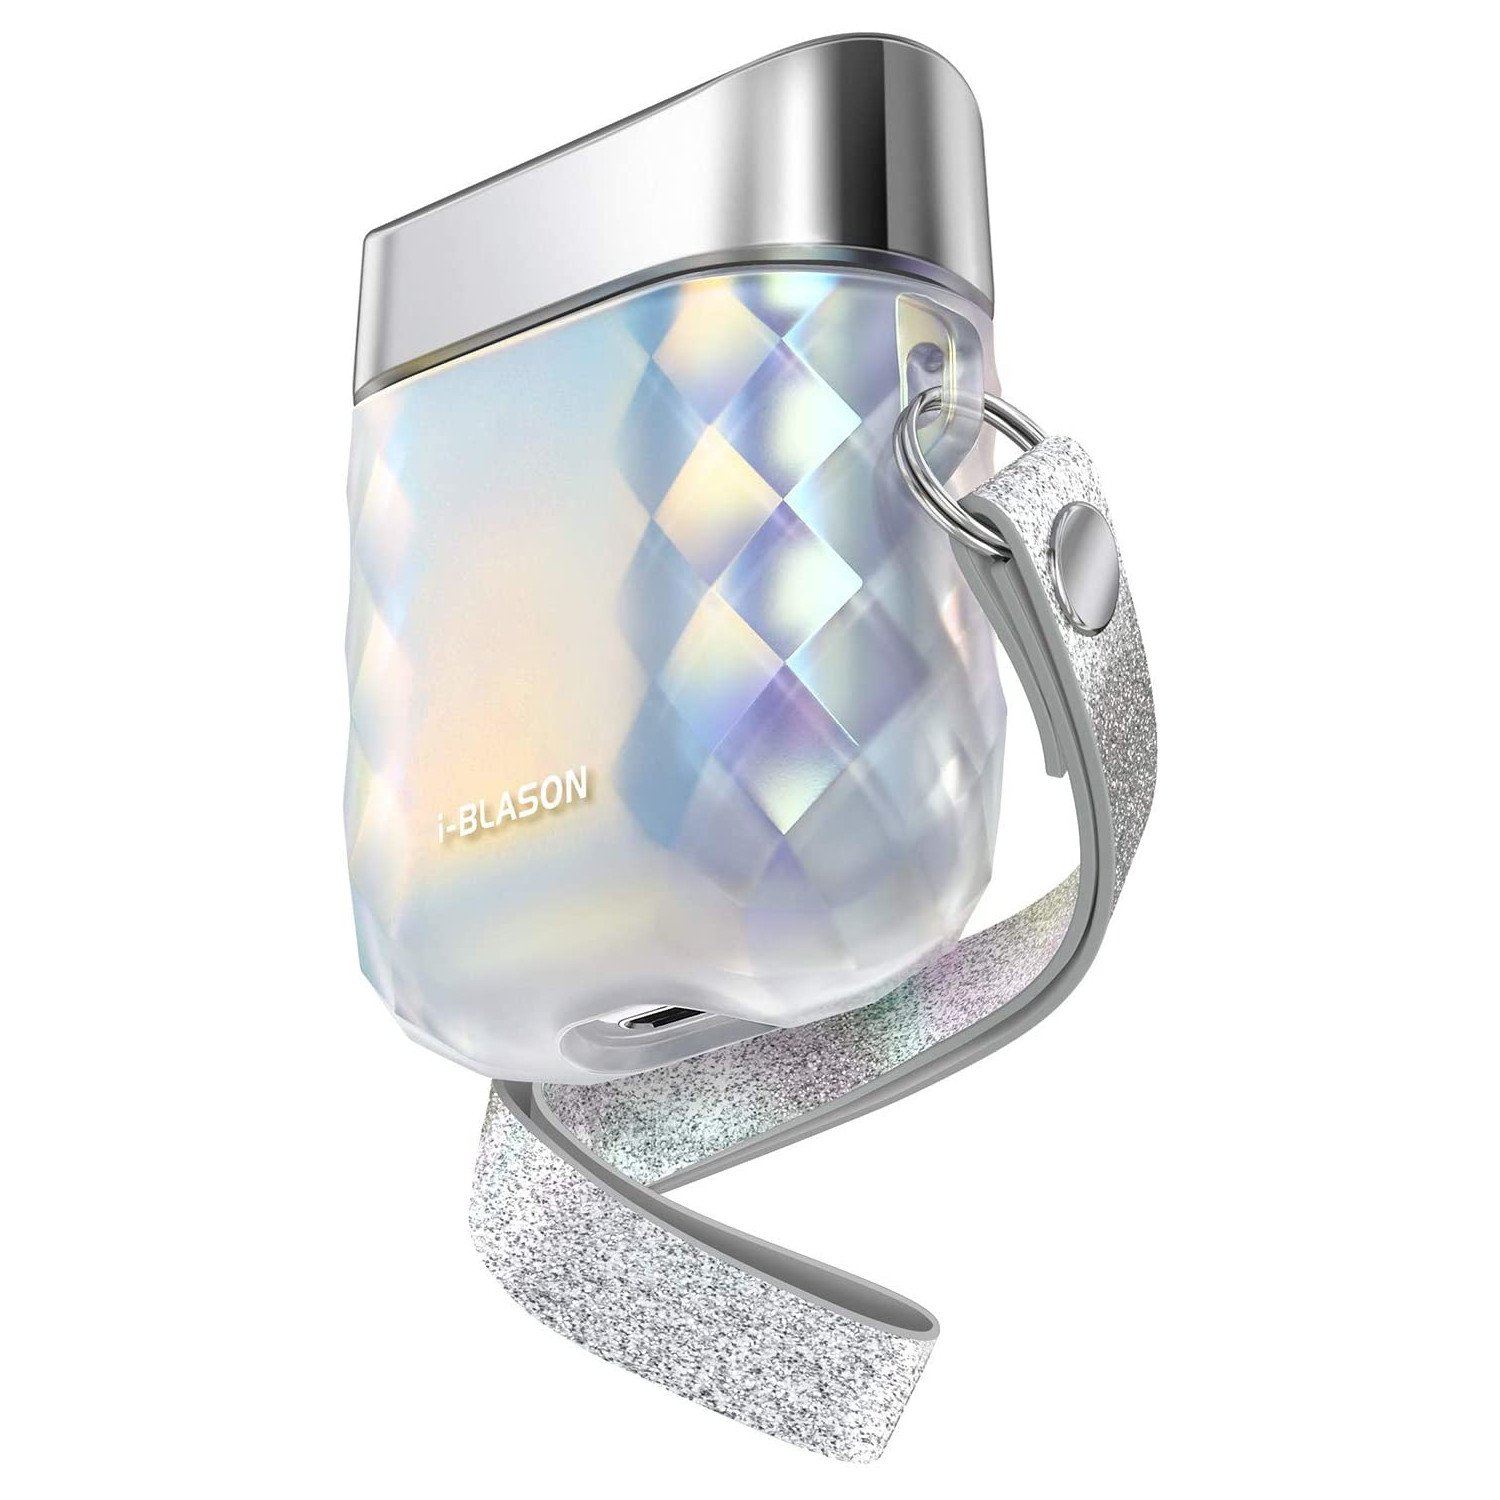 Holographic Gem Earbud Case Cover - Compatible With Apple AirPods